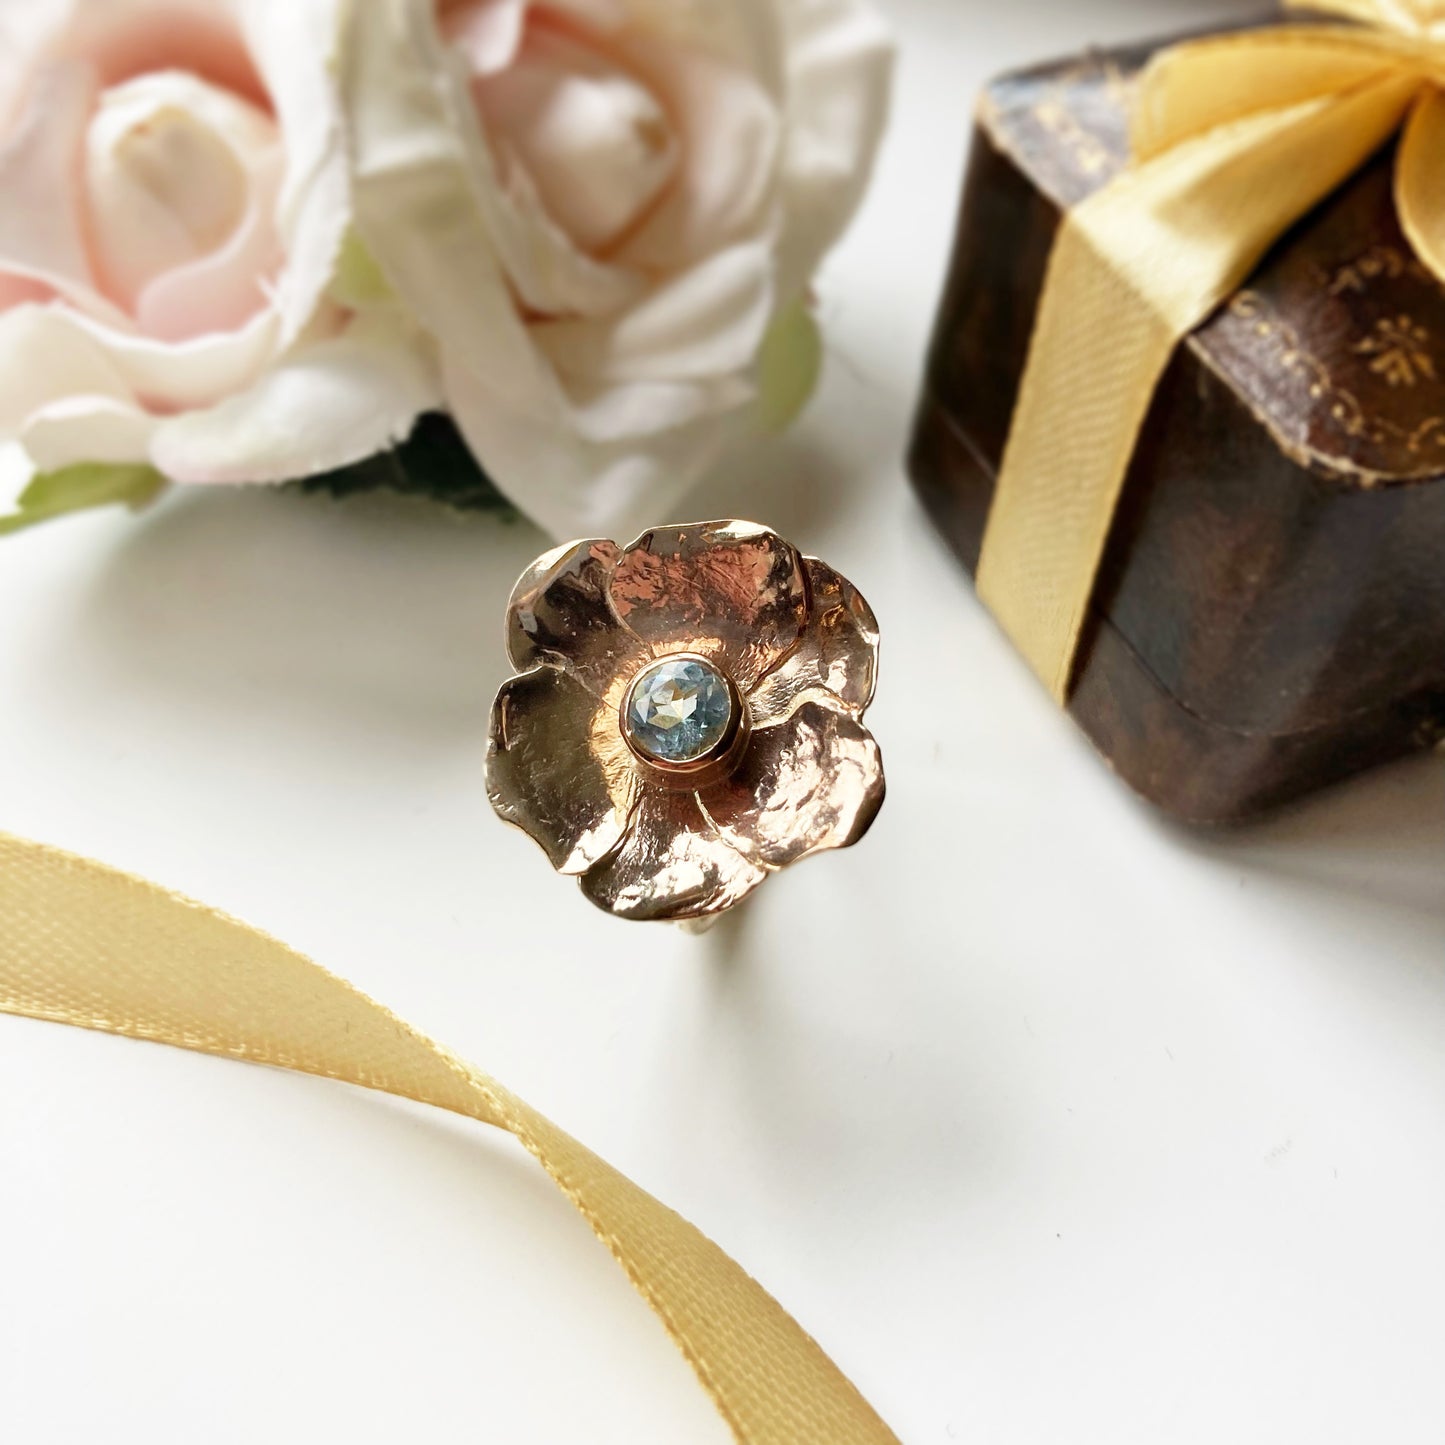 statement yellow gold floral cocktail ring with pale blue central gemstone, with gold ribbons, pale pink flowers and vintage box